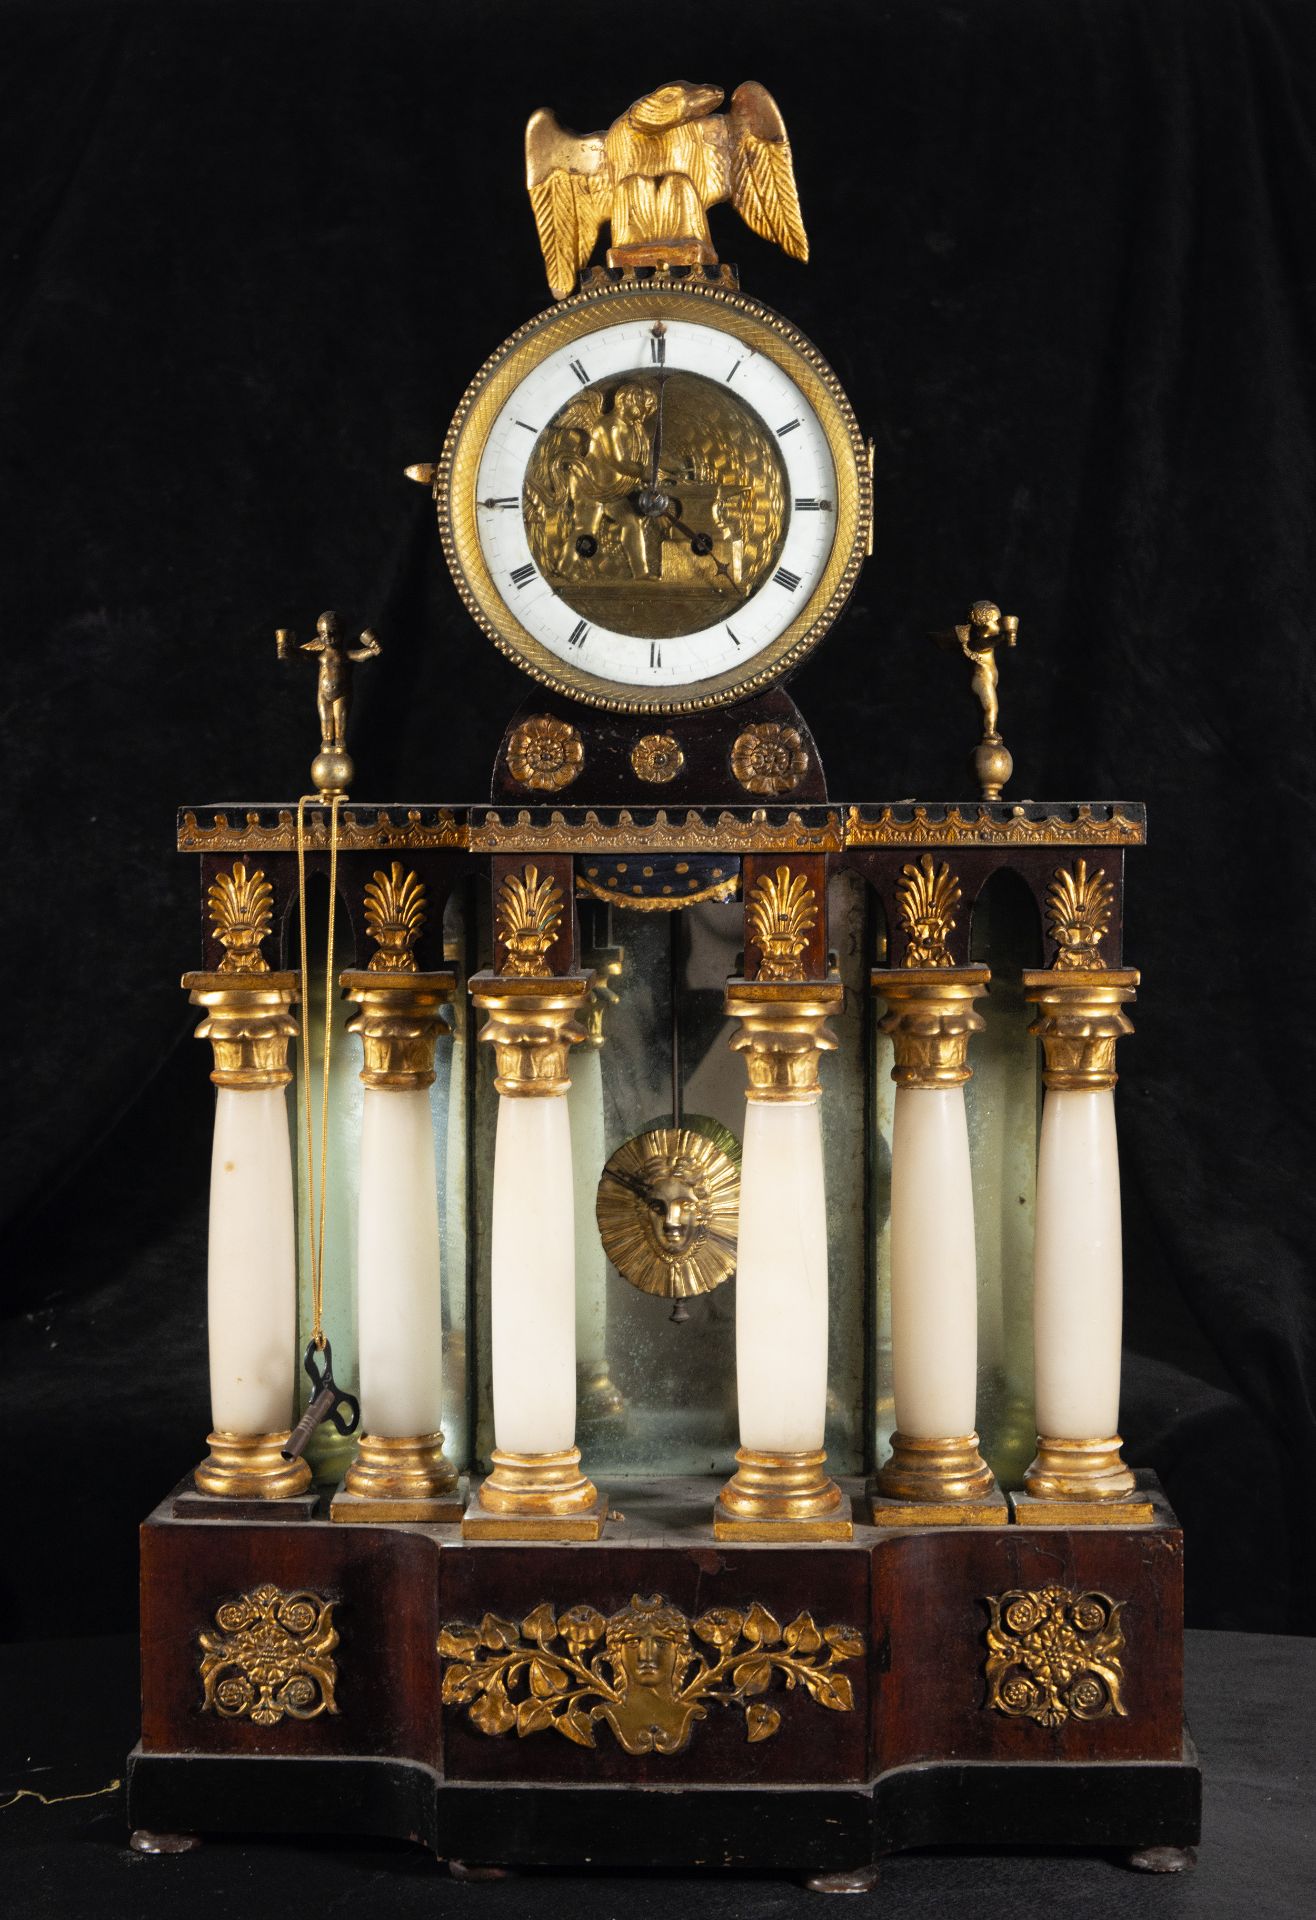 Large and Exquisite Bilderrahmen Table Clock with Automata from the late 19th century, Austria - Image 9 of 15